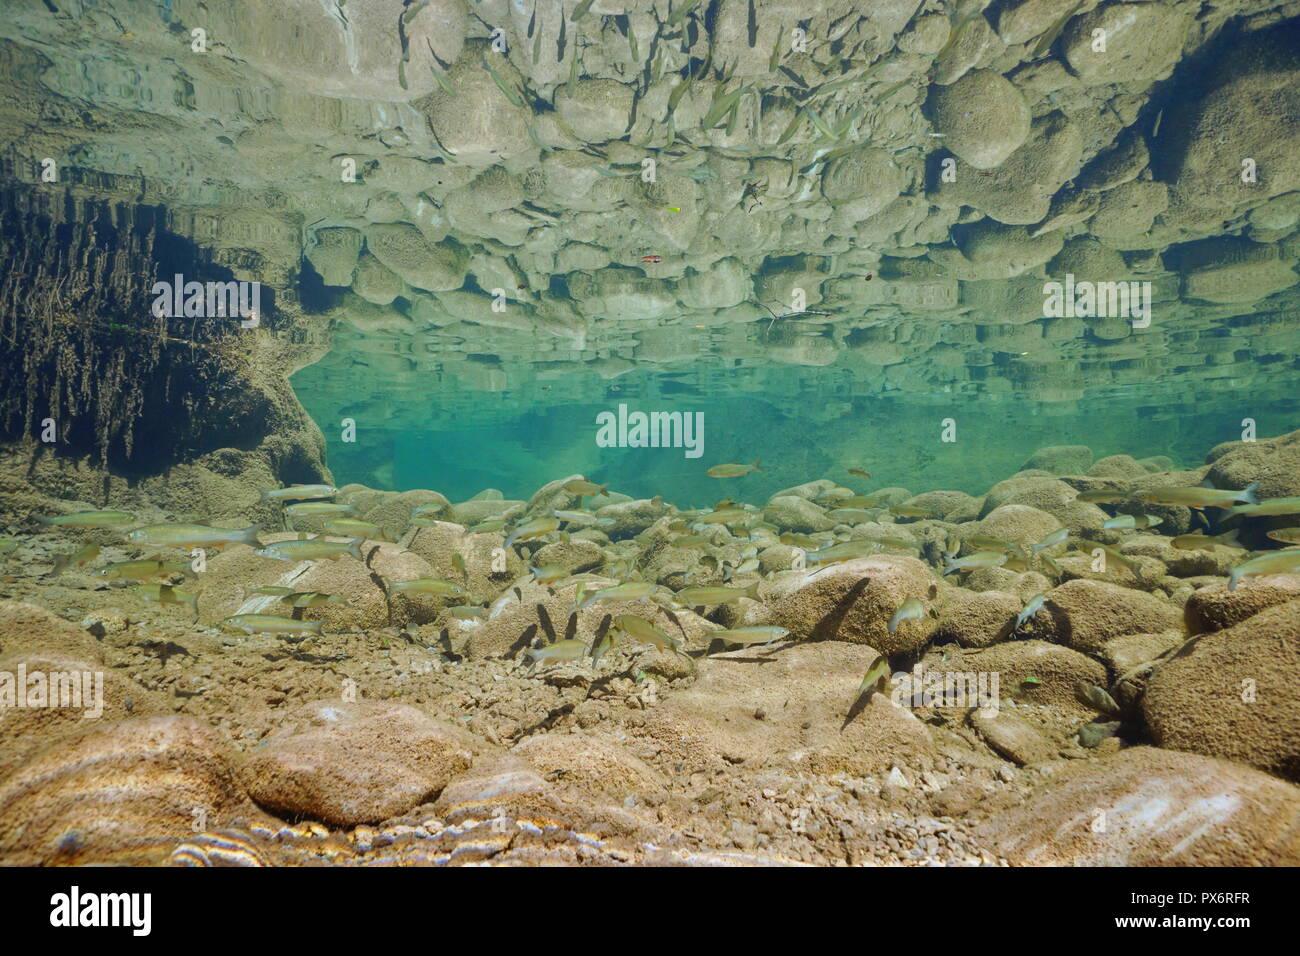 River underwater with rocks and a school of fish reflected in the water surface (chub Squalius cephalus), La Muga, Alt Emporda, Catalonia, Spain Stock Photo